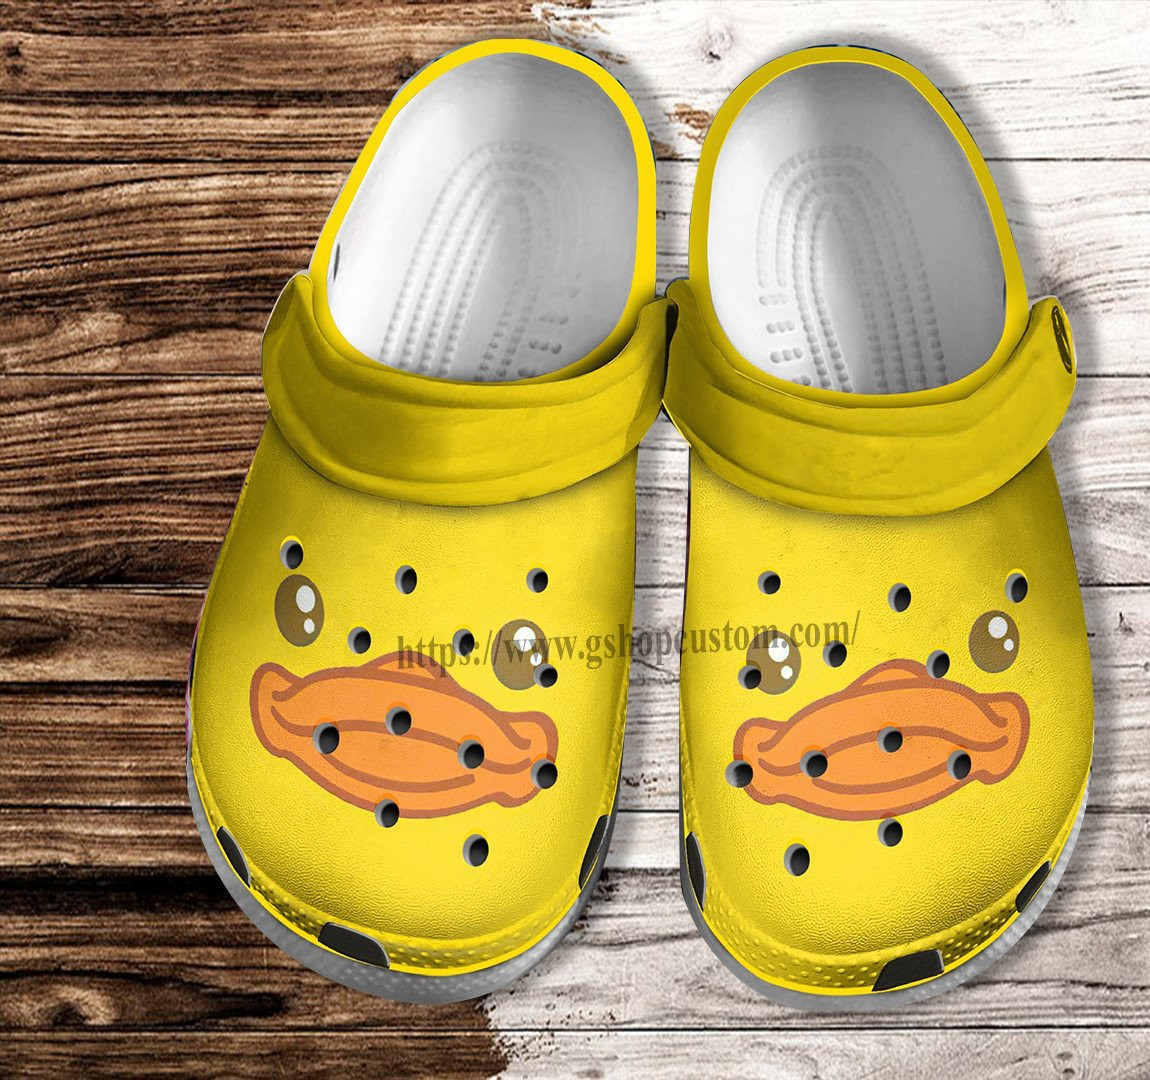 Duck Face Yellow Crocs Shoes For Men Women - Funny Duck Speculum Face Croc Clogs Shoes Gift Birthday